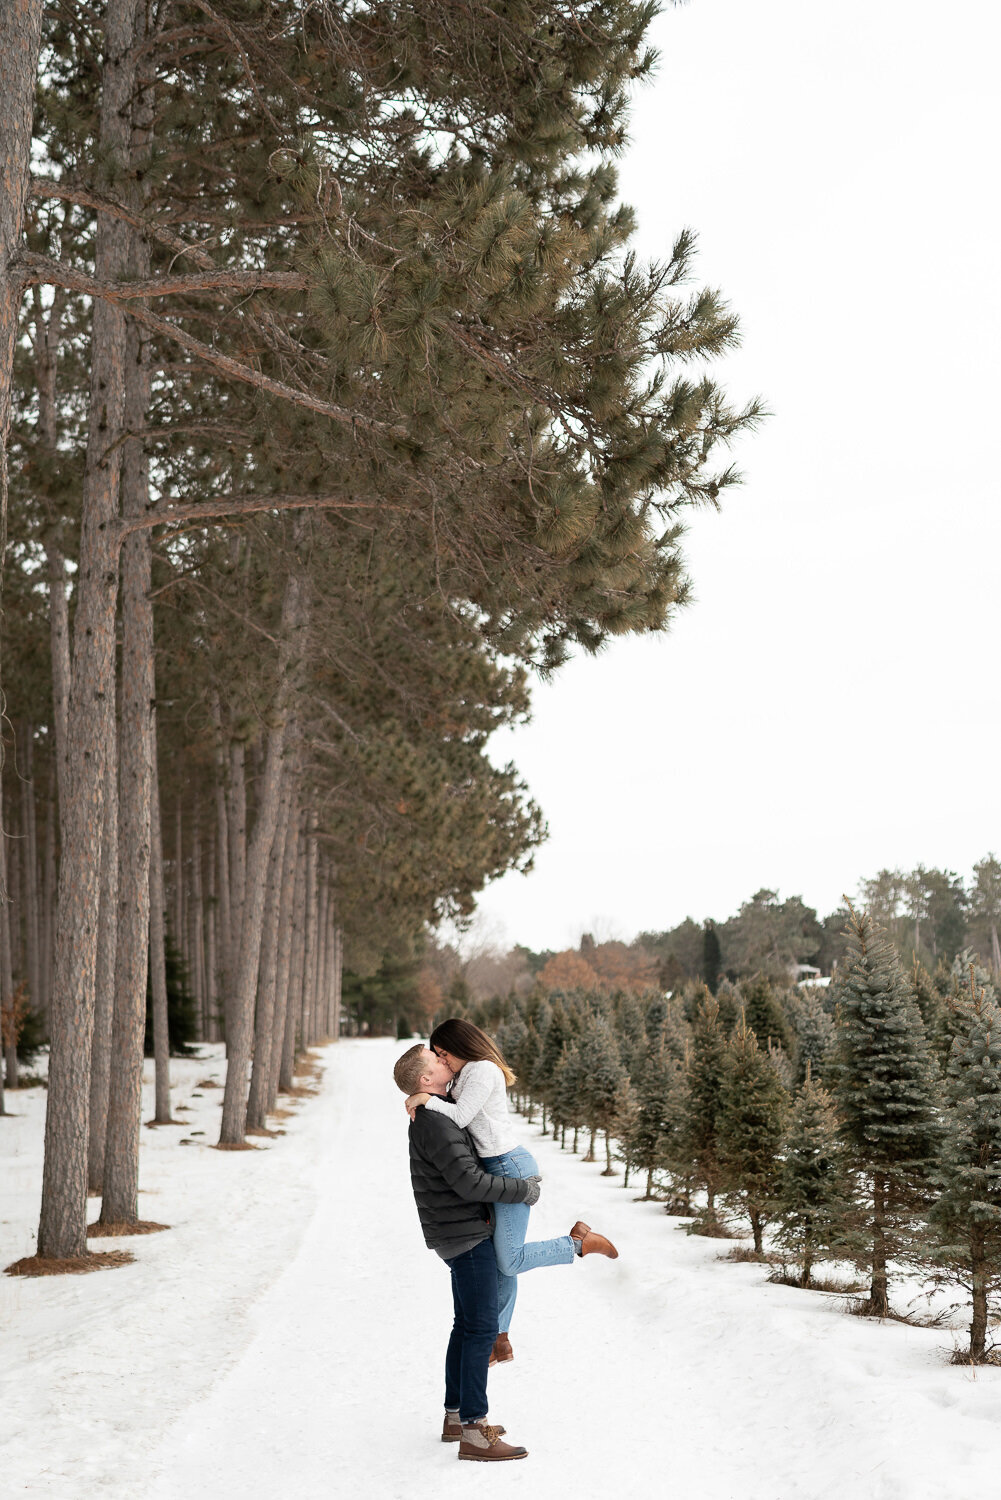 Man lifts and kisses woman in the snow at a Christmas tree lot in Anoka, Minnesota.